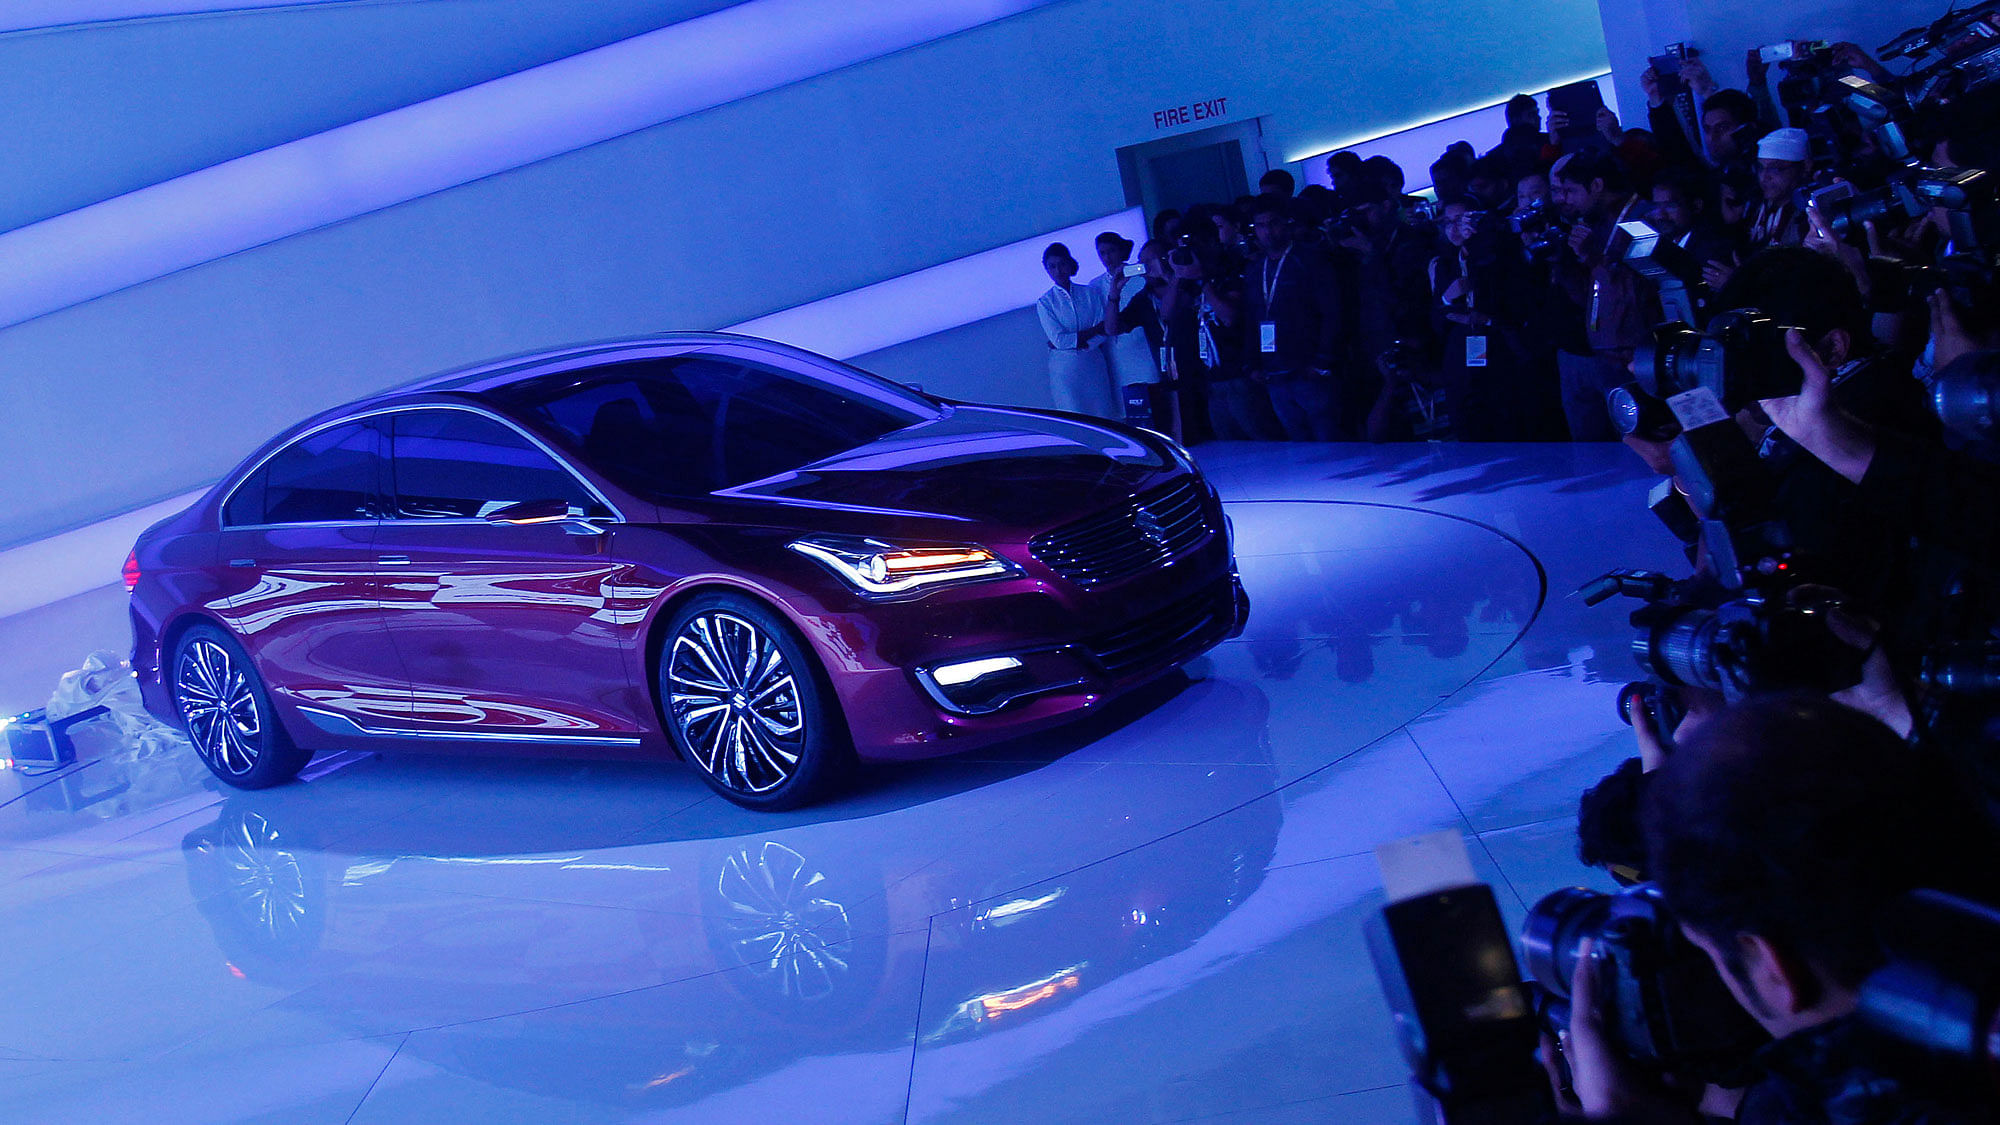 Maruti Suzuki’s Ciaz Concept car on  display at the 2014 Indian Auto Expo. (Photo: Reuters)